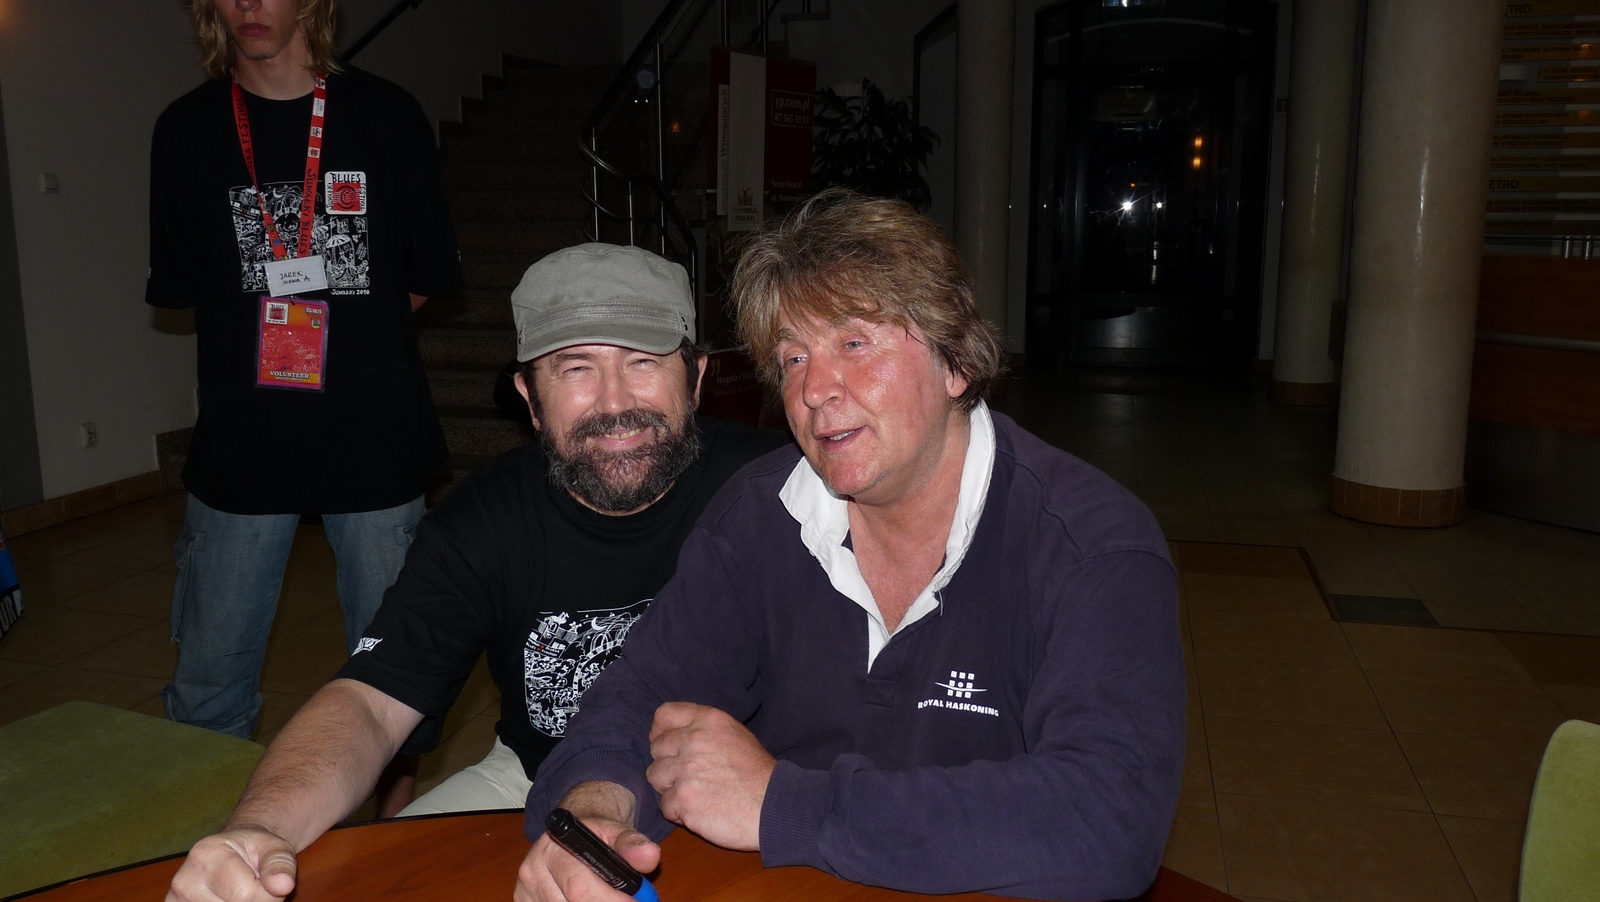 WITH MICK TAYLOR